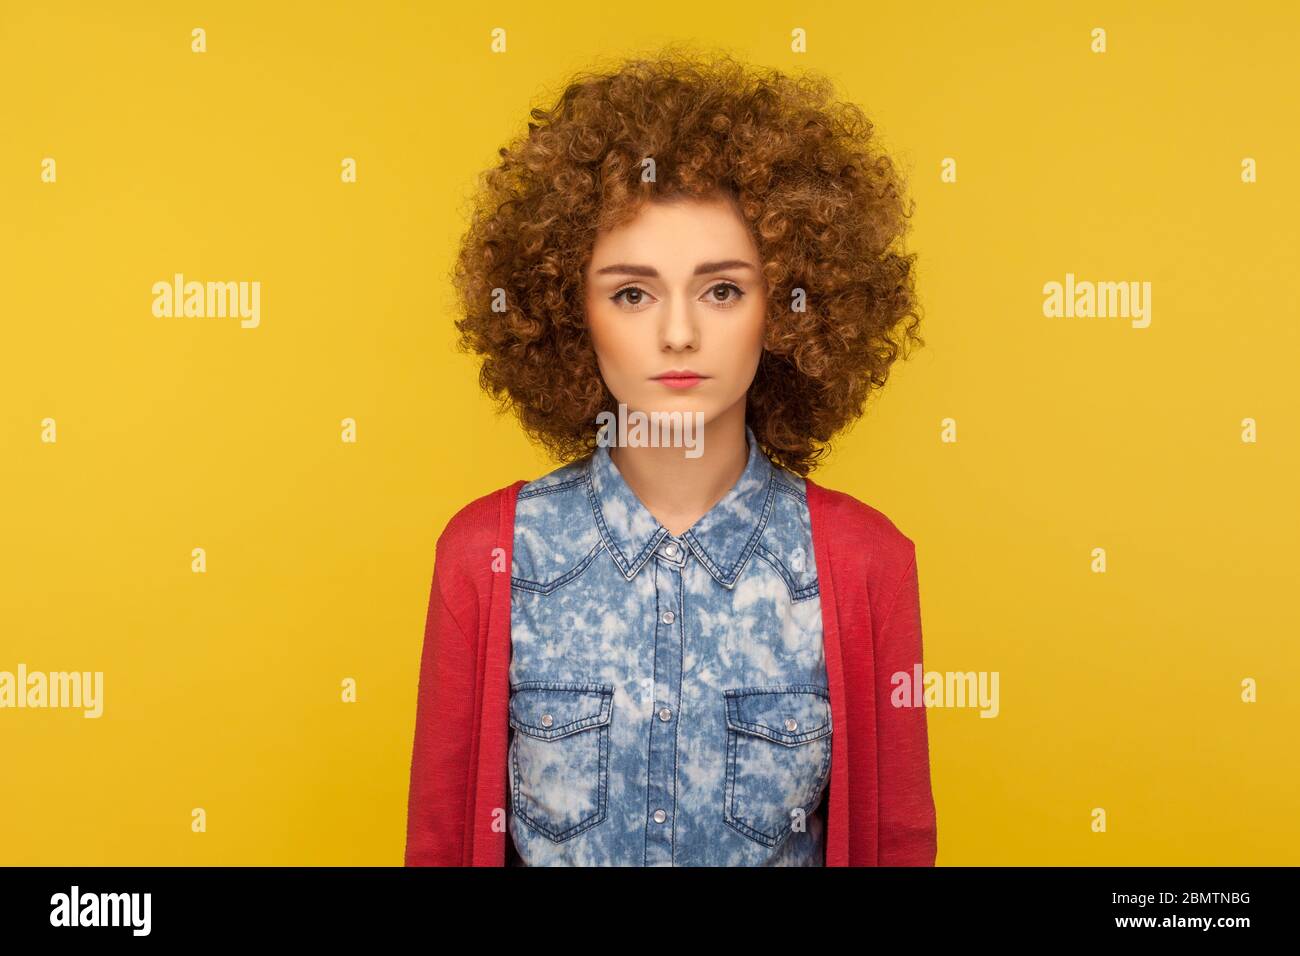 Portrait of woman with curly hair in casual style jeans shirt looking at camera with serious unhappy expression, model unsmiling and looking depressed Stock Photo